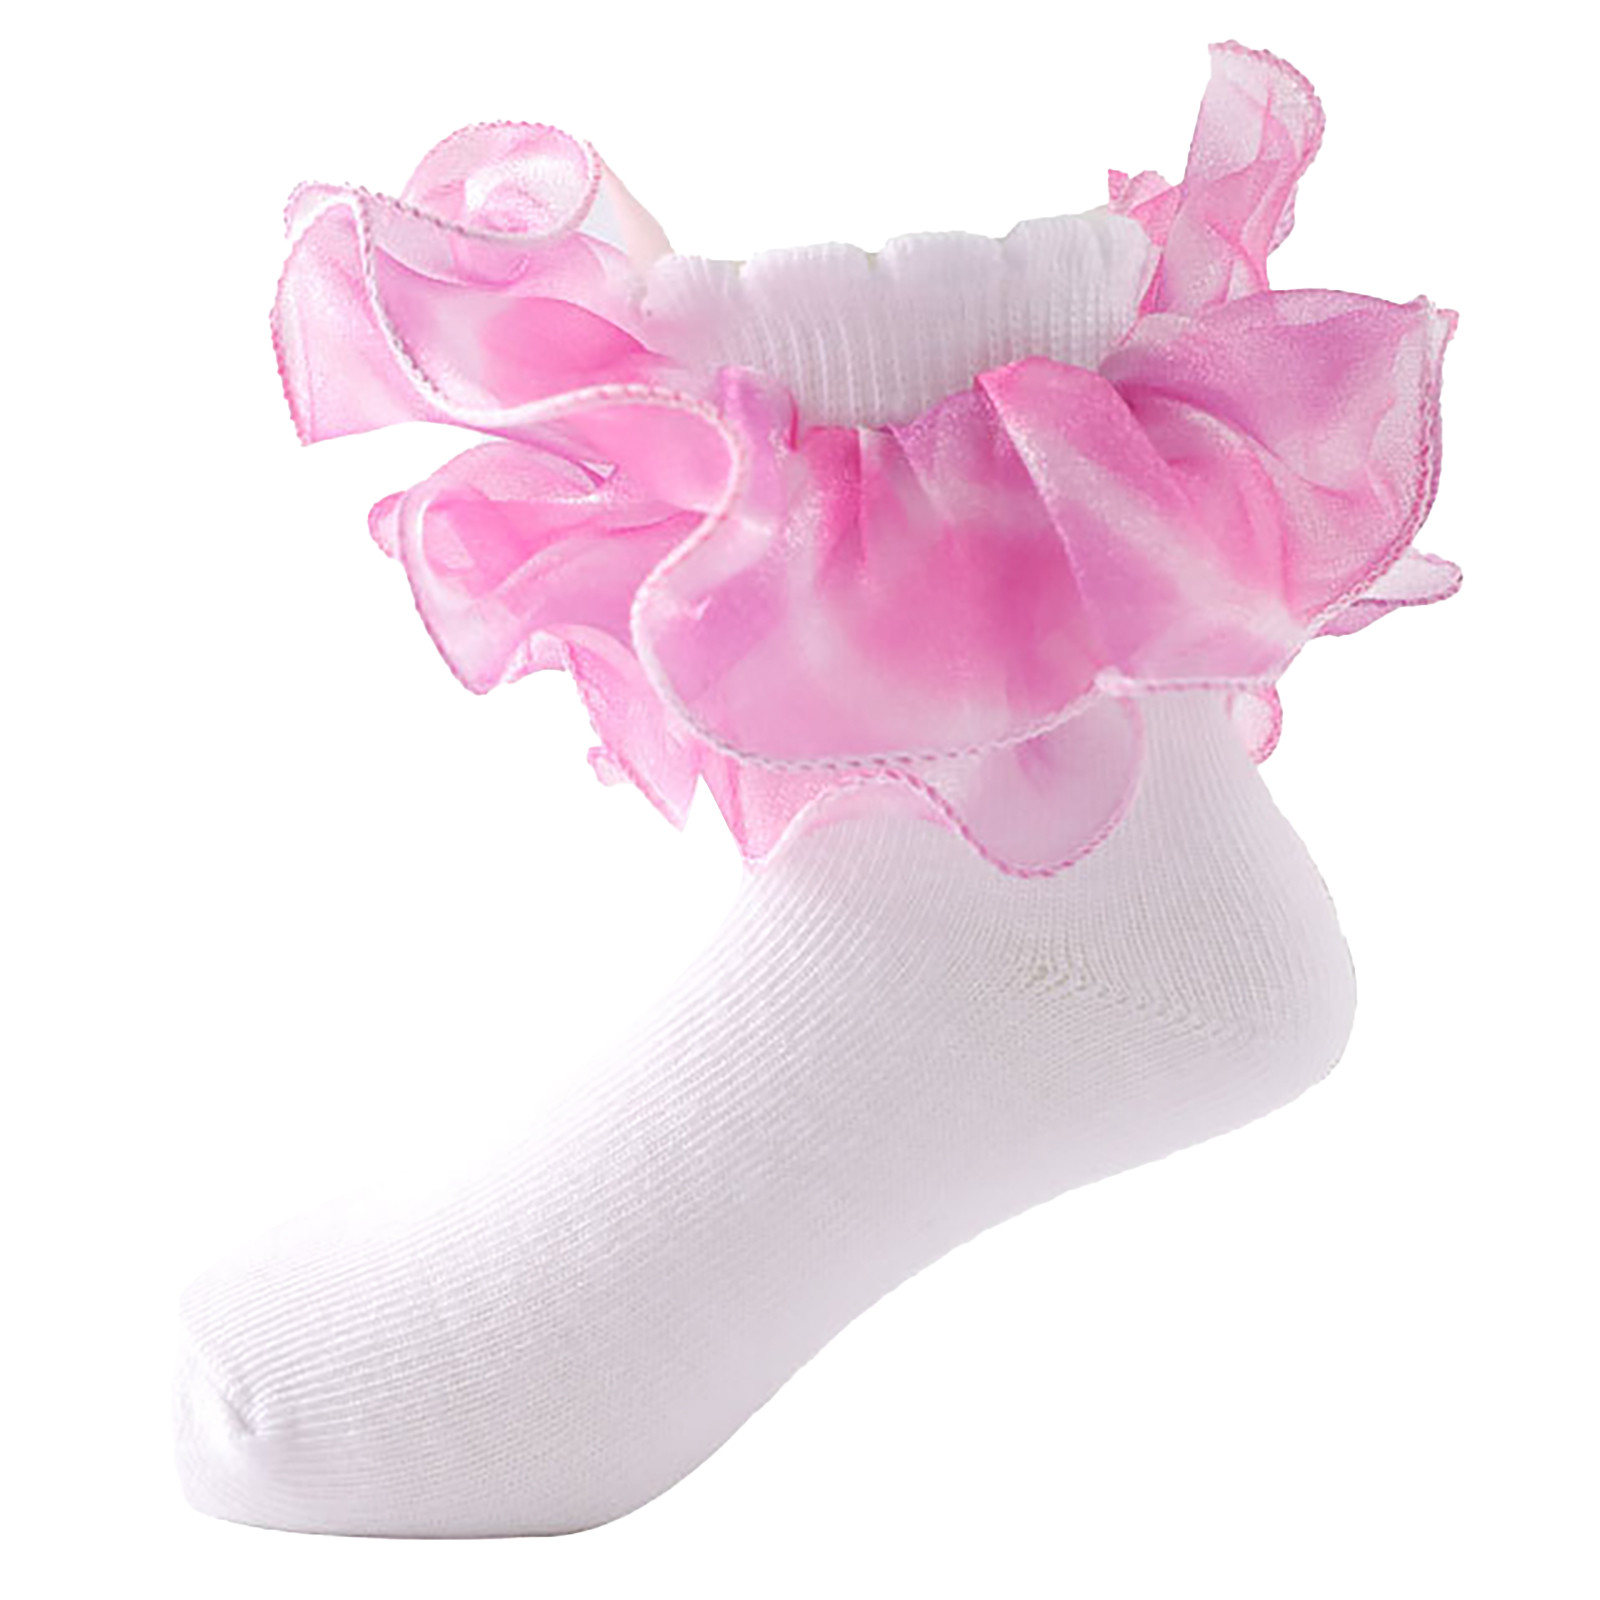 RUICUW Toddler Socks Floor Socks Lace Socks With Ripple And Ruffle ...